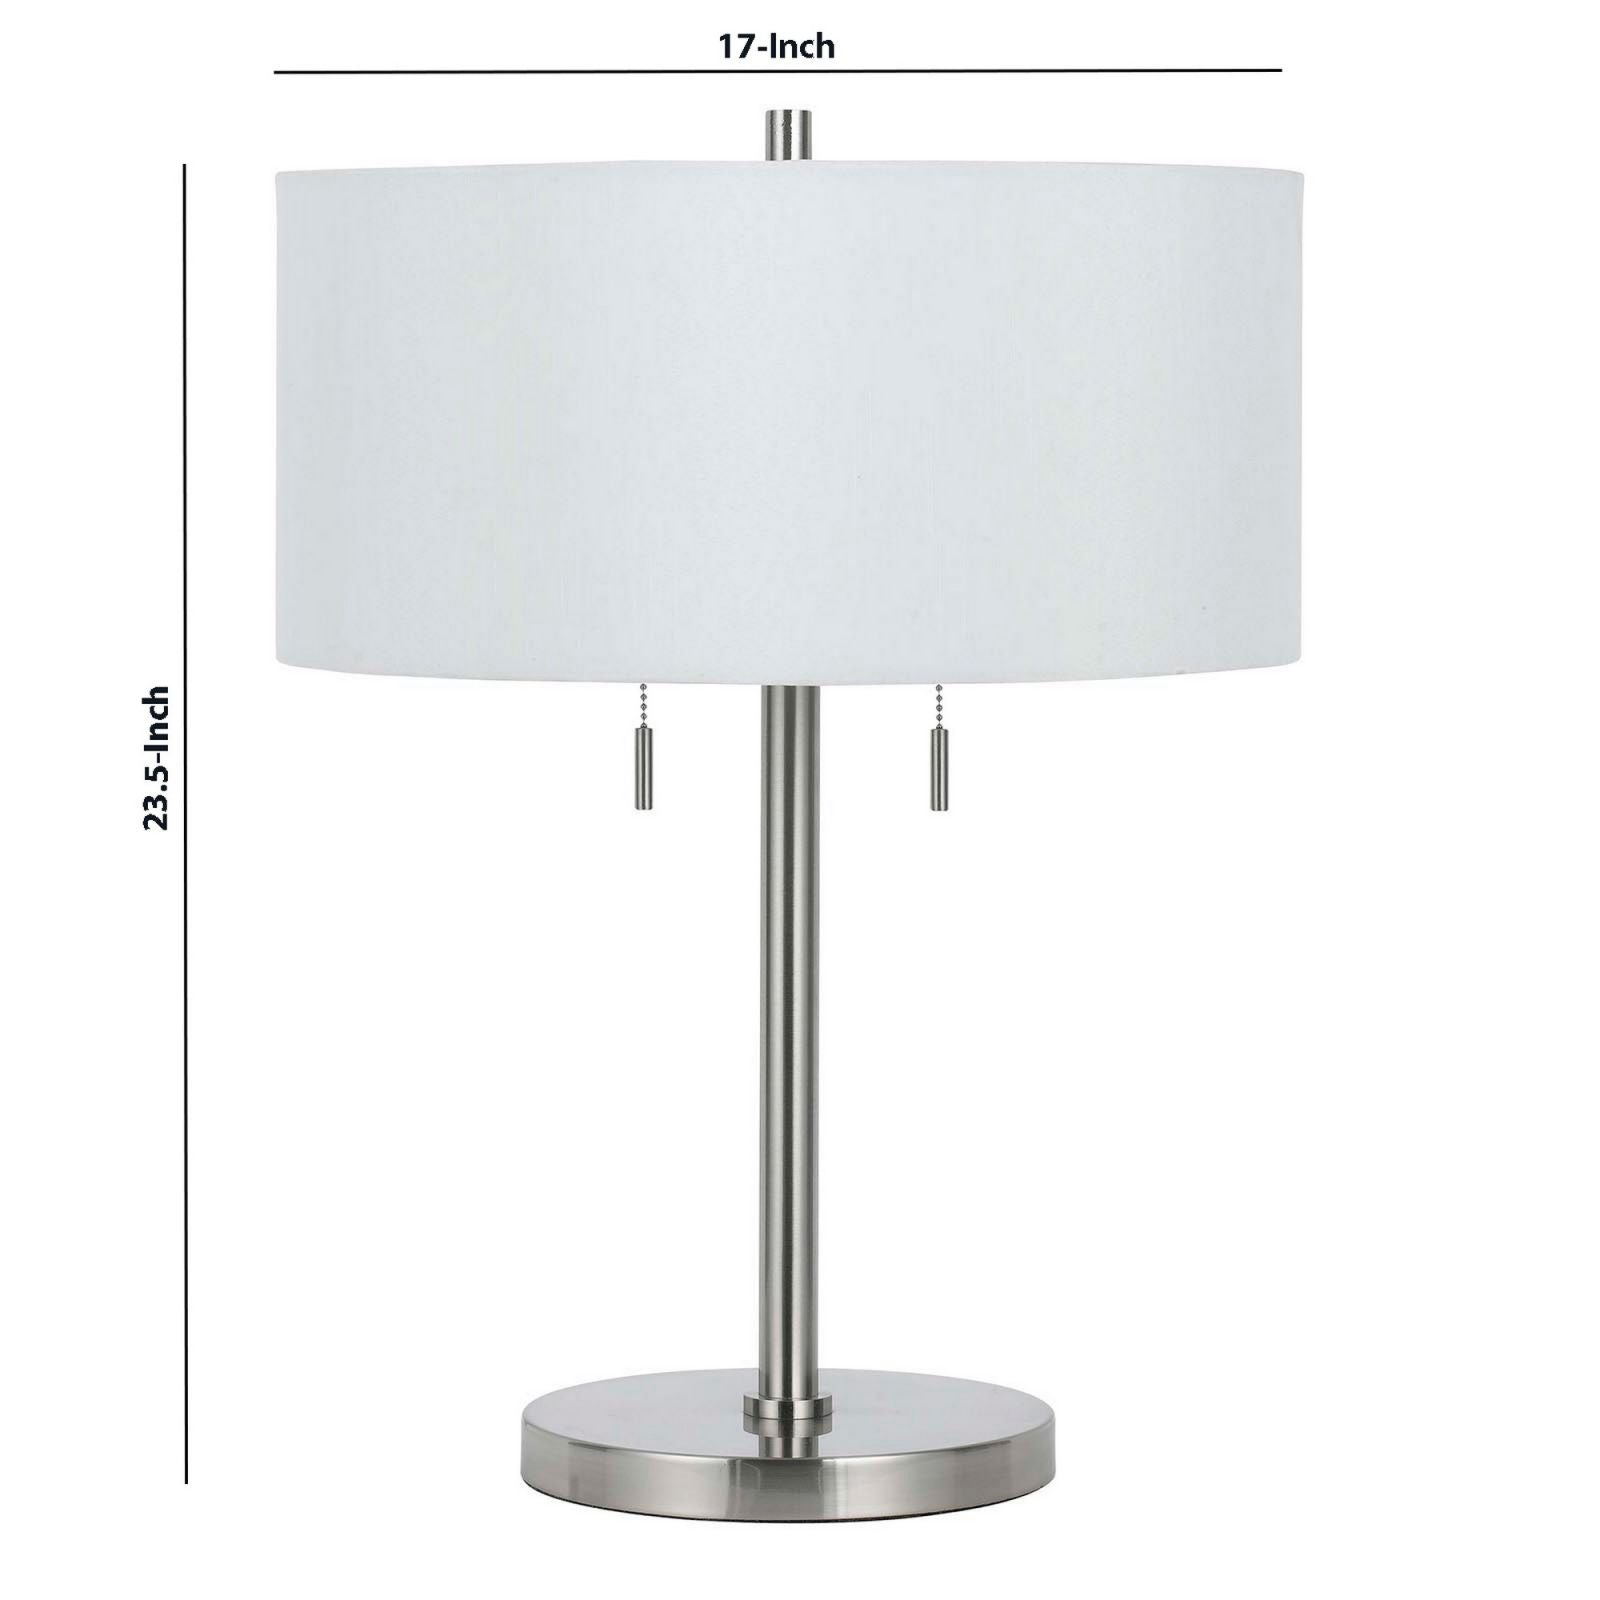 Metal Body Table Lamp With Fabric Drum Shade And Pull Chain Switch, Silver By Benzara